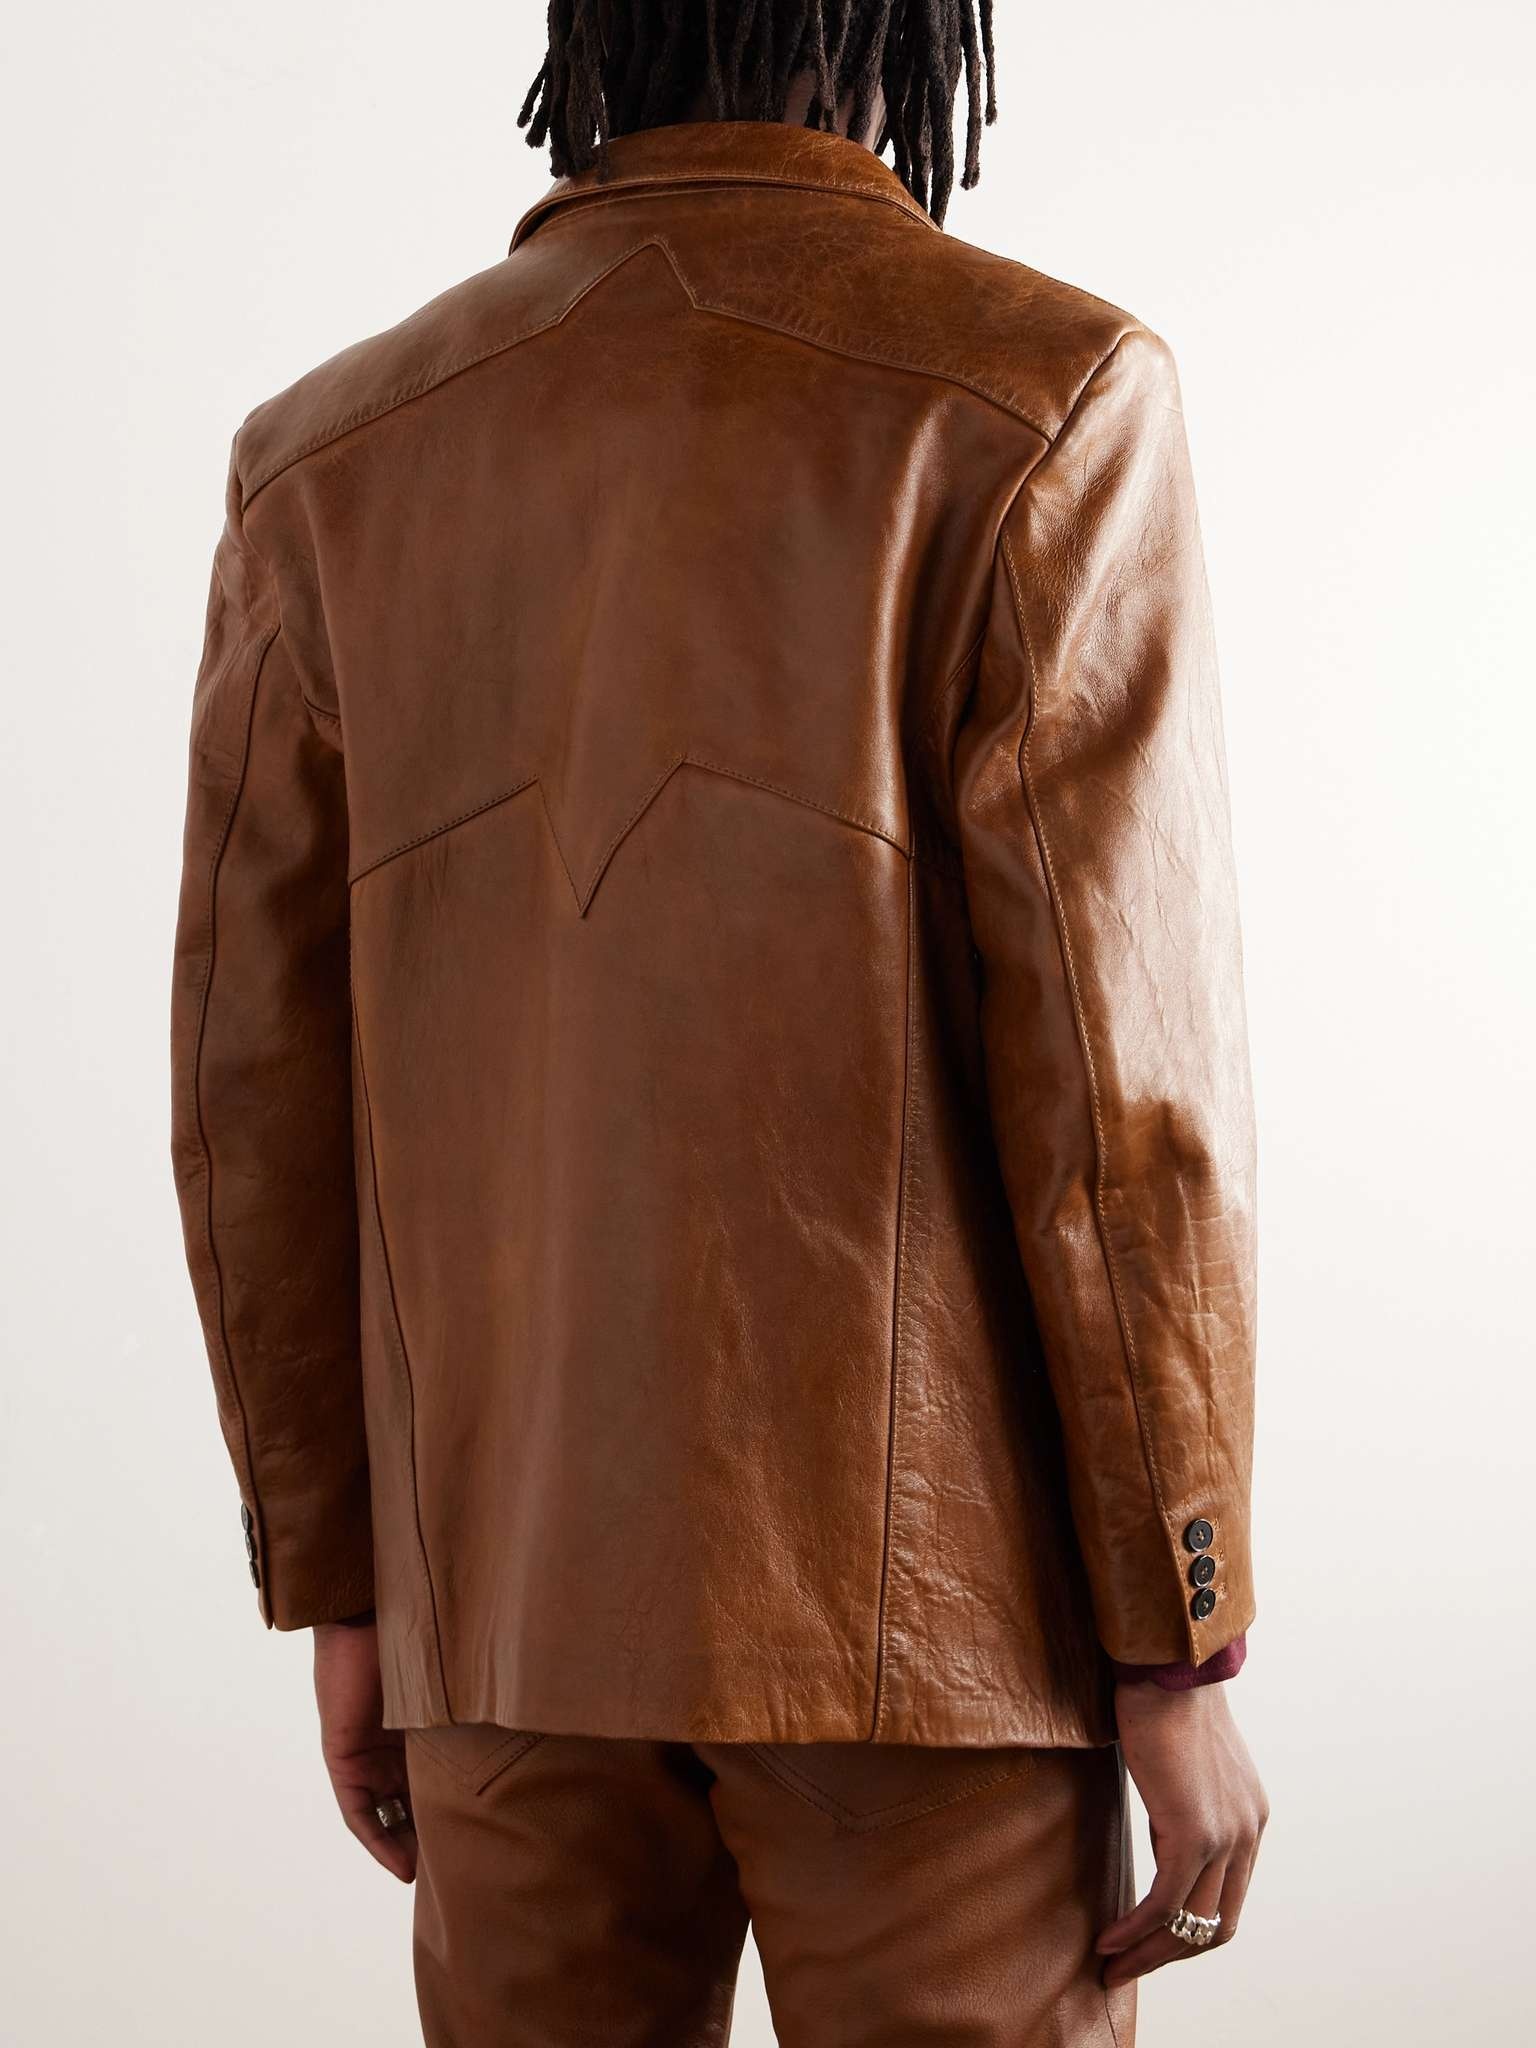 Go To Dallas and Take a Left Panelled Leather Jacket - 4